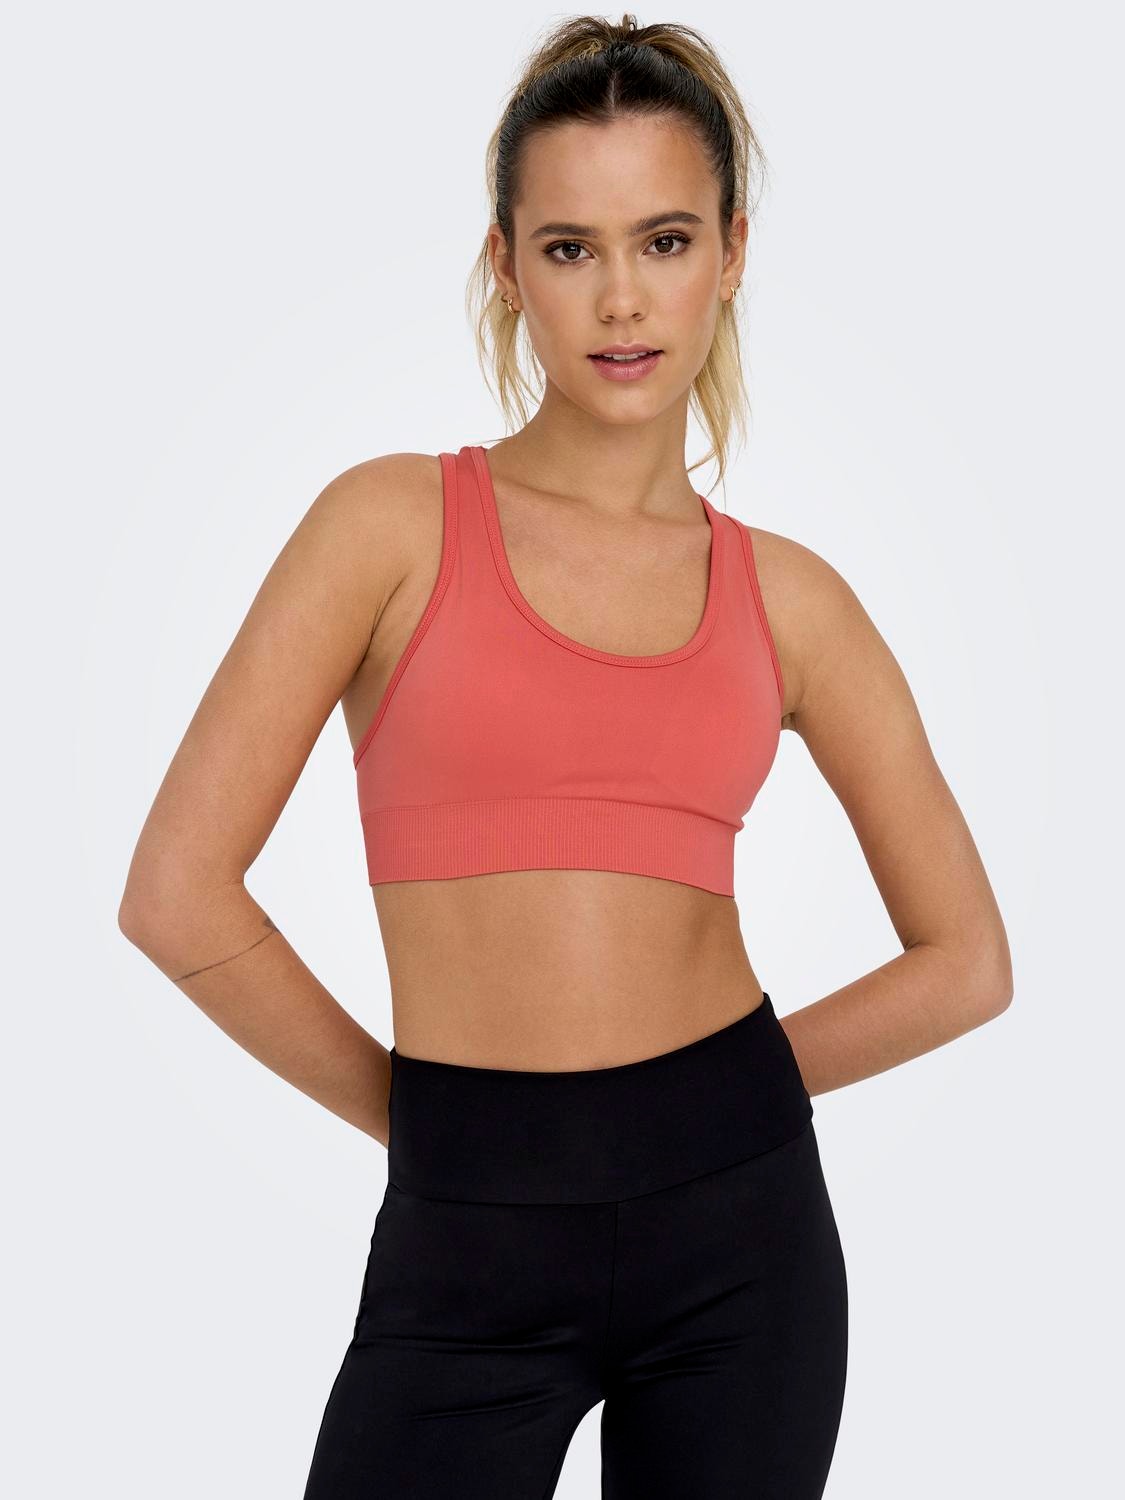 Seamless Sports Bra with 20% discount!